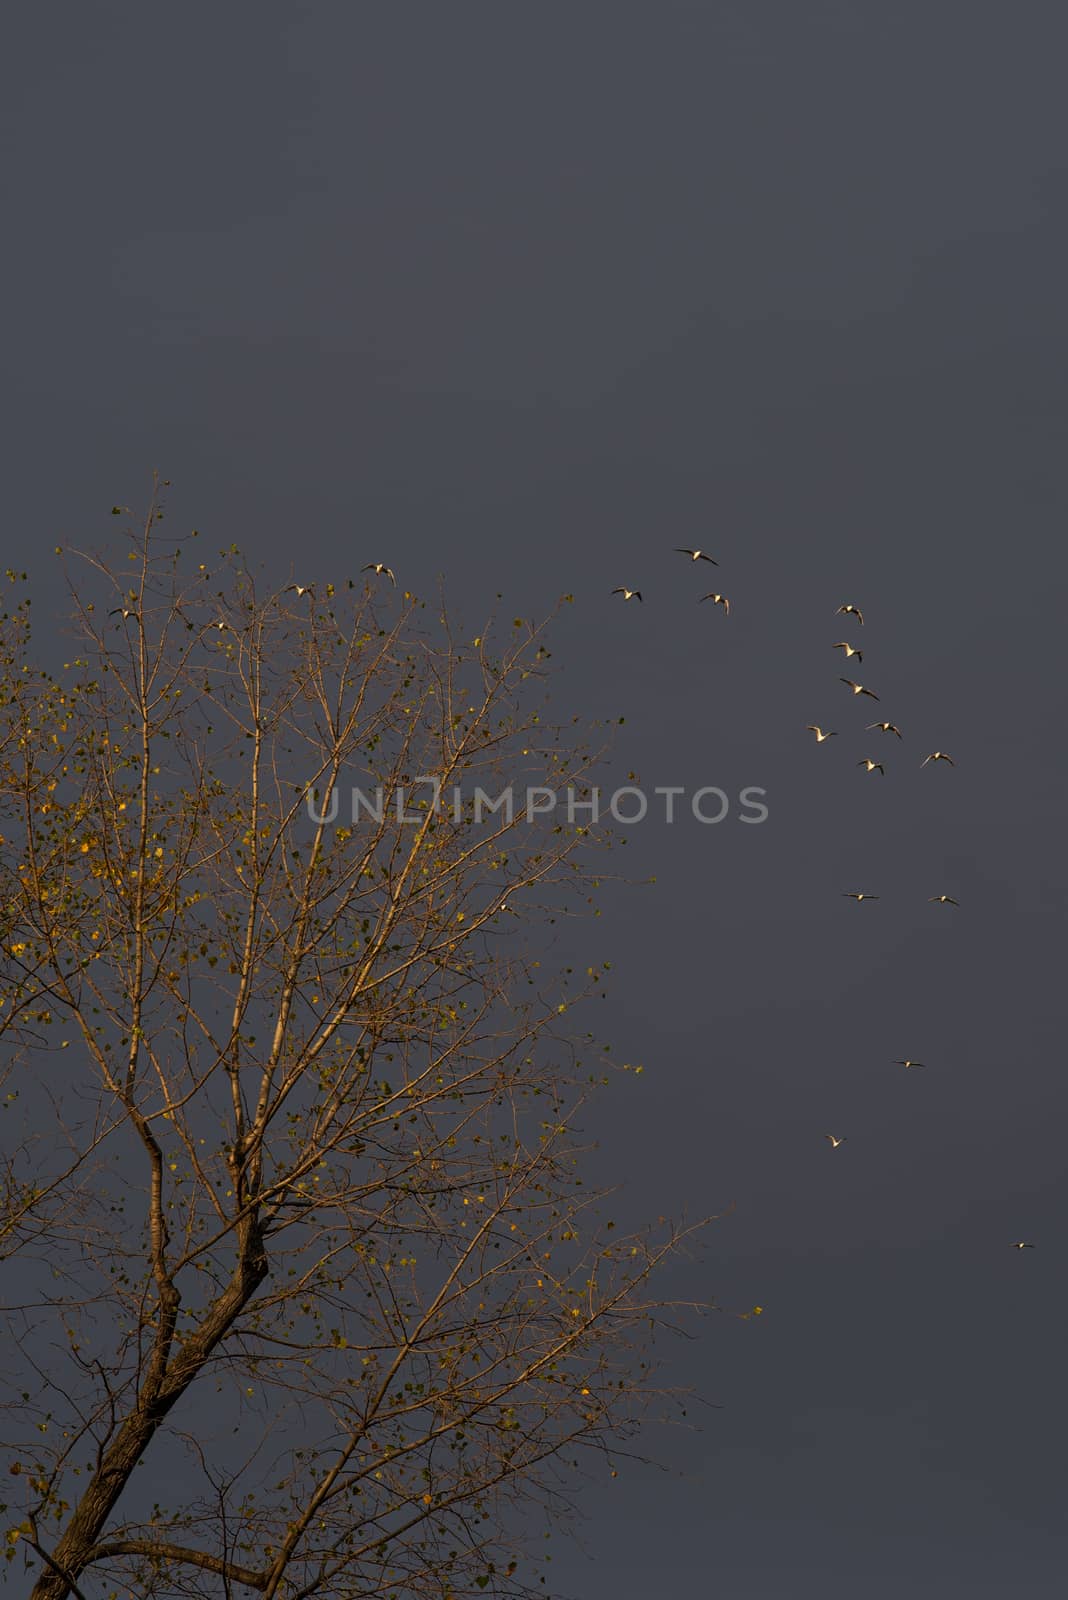 Yellow treetop with flying birds with a storm sky